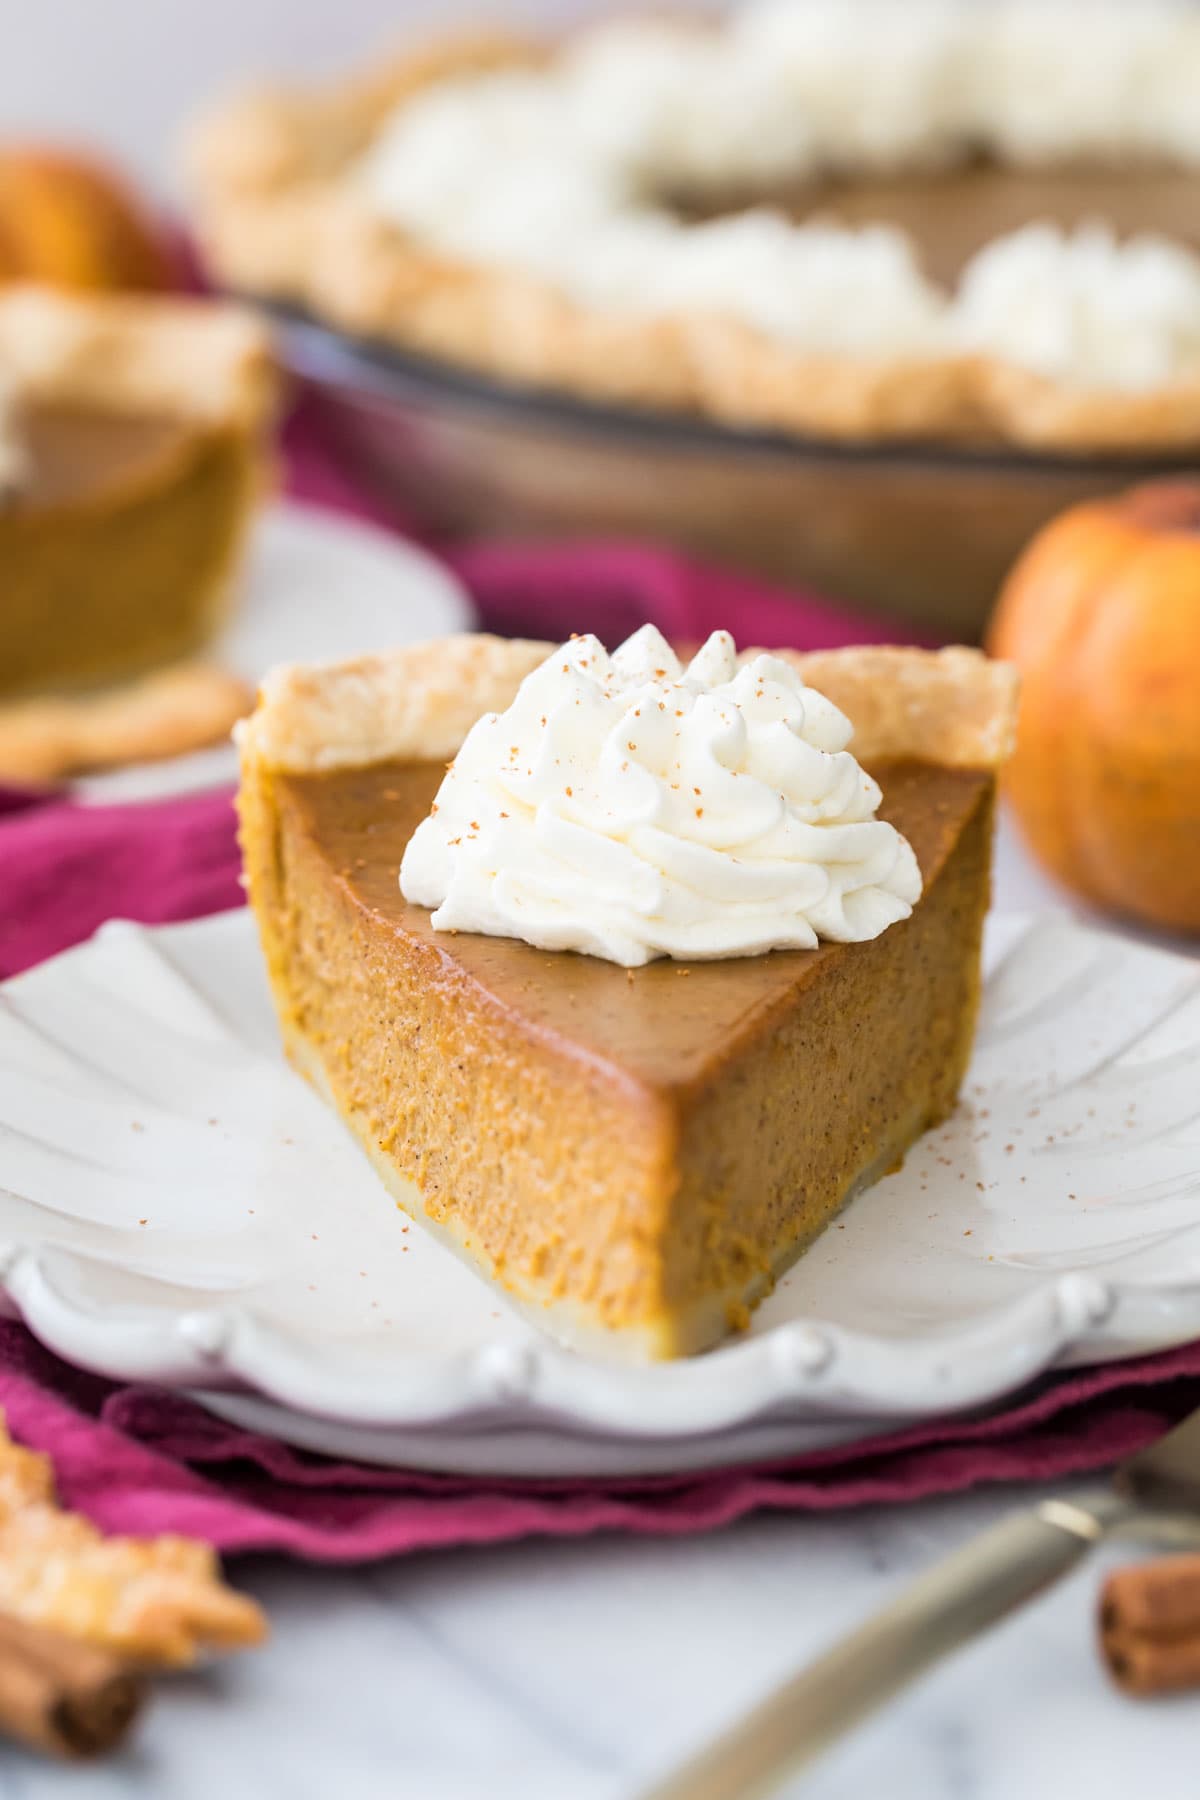 Head-on view of a pumpkin pie slice topped with a piped swirl of whipped cream